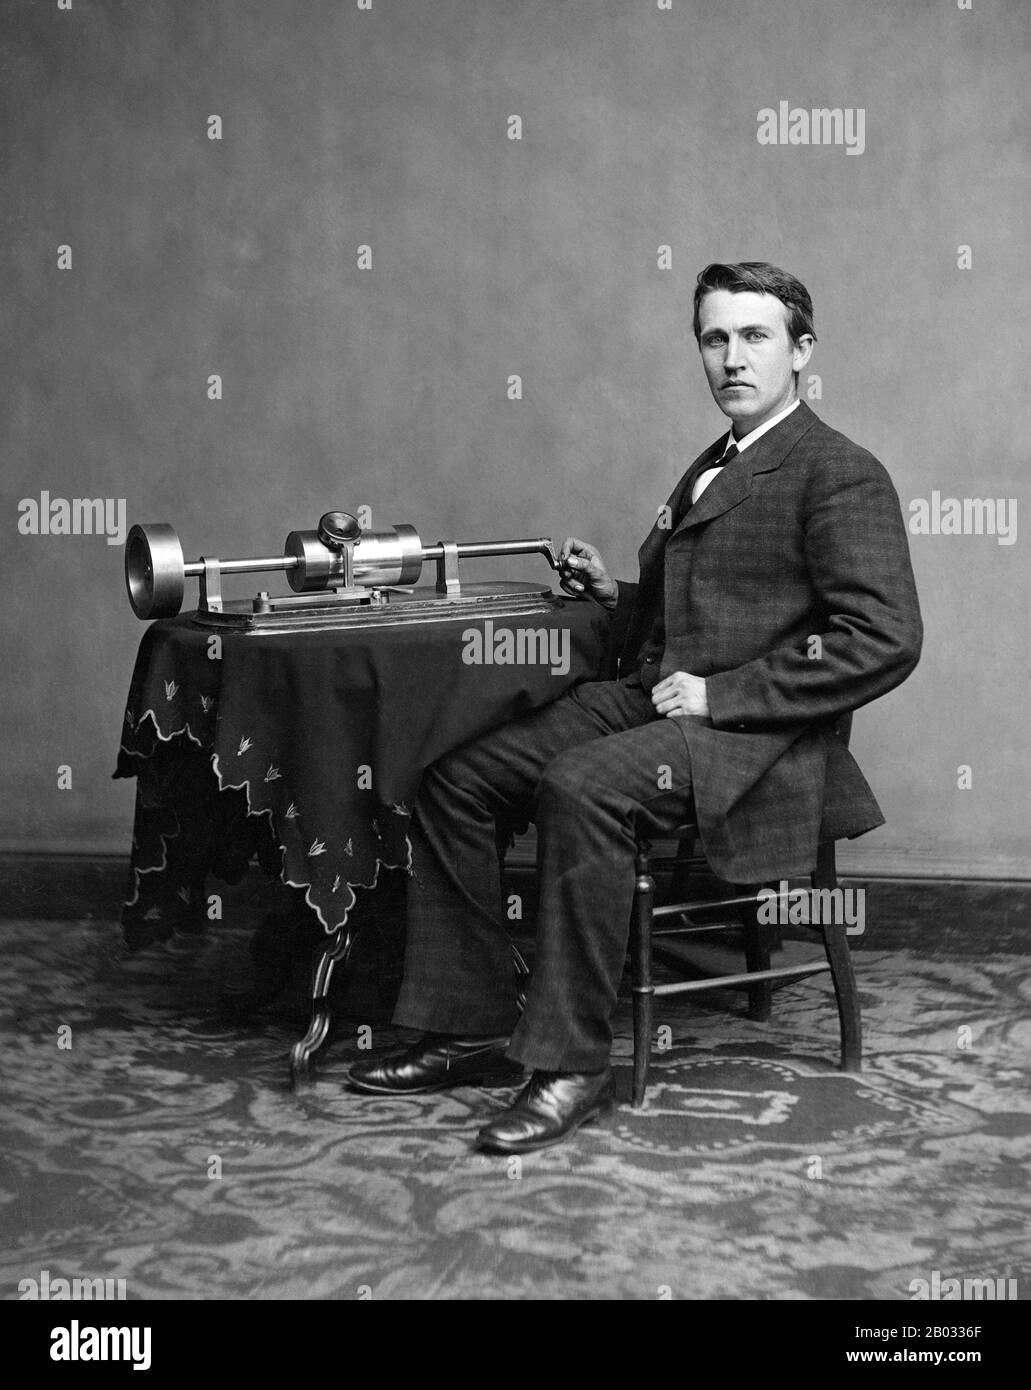 Thomas Alva Edison (February 11, 1847 – October 18, 1931) was an American inventor and businessman. He developed many devices that greatly influenced life around the world, including the phonograph, the motion picture camera, and the long-lasting, practical electric light bulb.  Edison was a prolific inventor, holding 1,093 US patents in his name, as well as many patents in the United Kingdom, France, and Germany. More significant than the number of Edison's patents was the widespread impact of his inventions: electric light and power utilities, sound recording, and motion pictures all establi Stock Photo